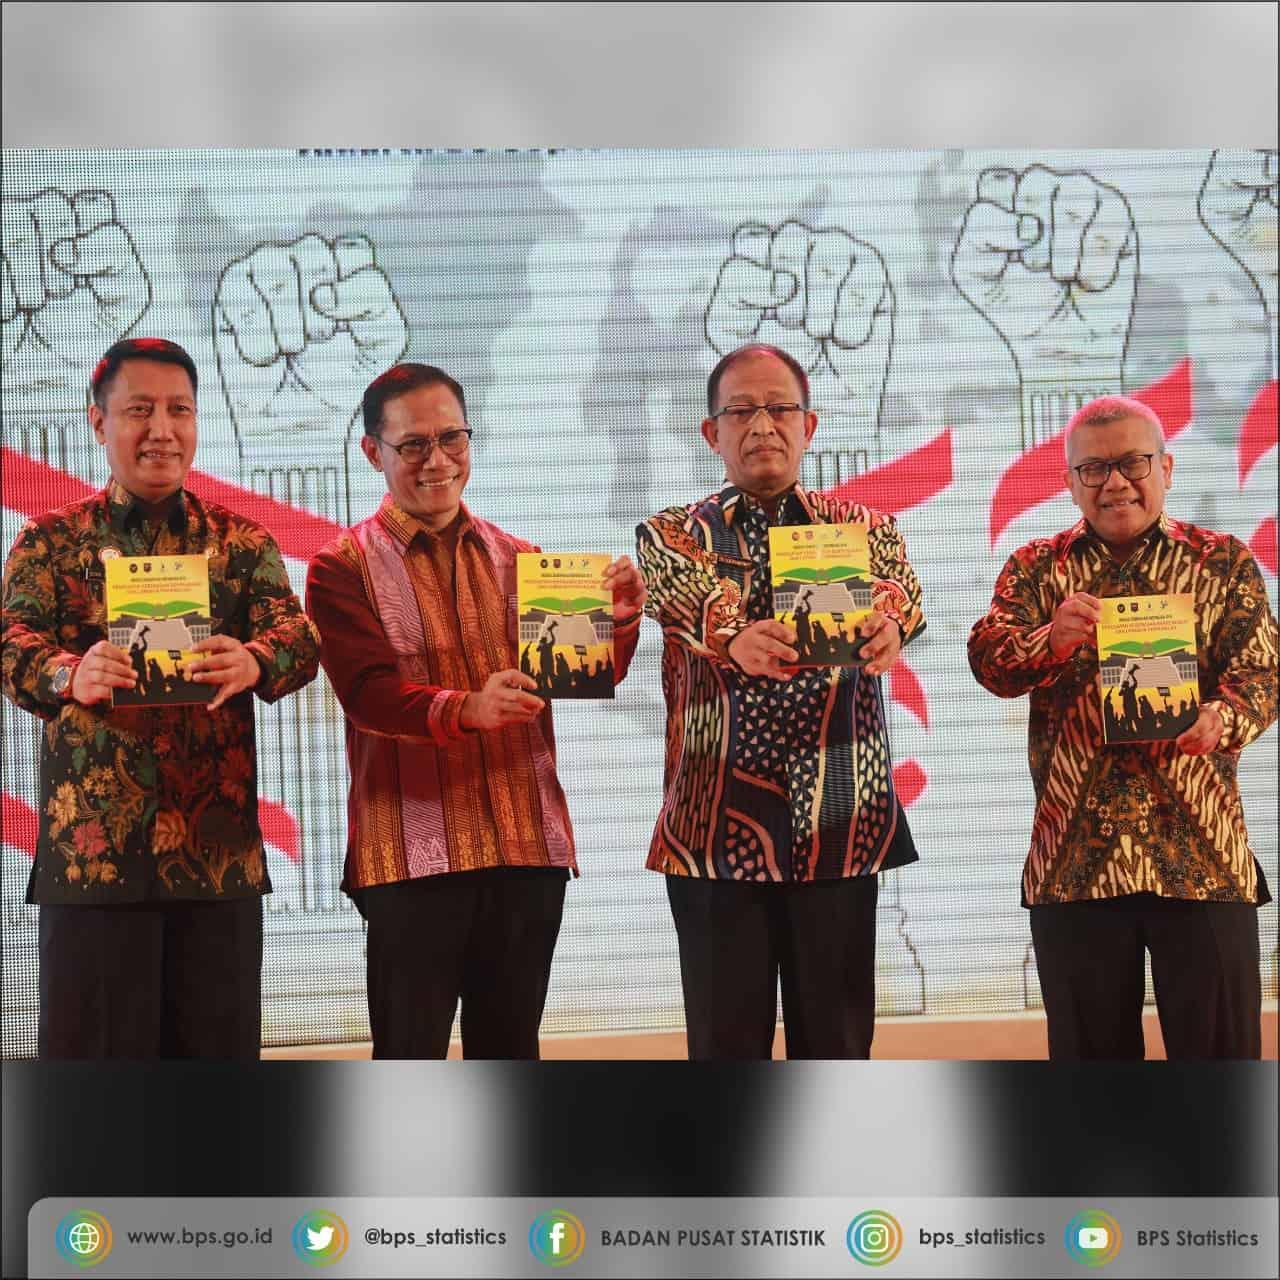 The launching of the Indonesian Democracy Index Book (IDI) 2018